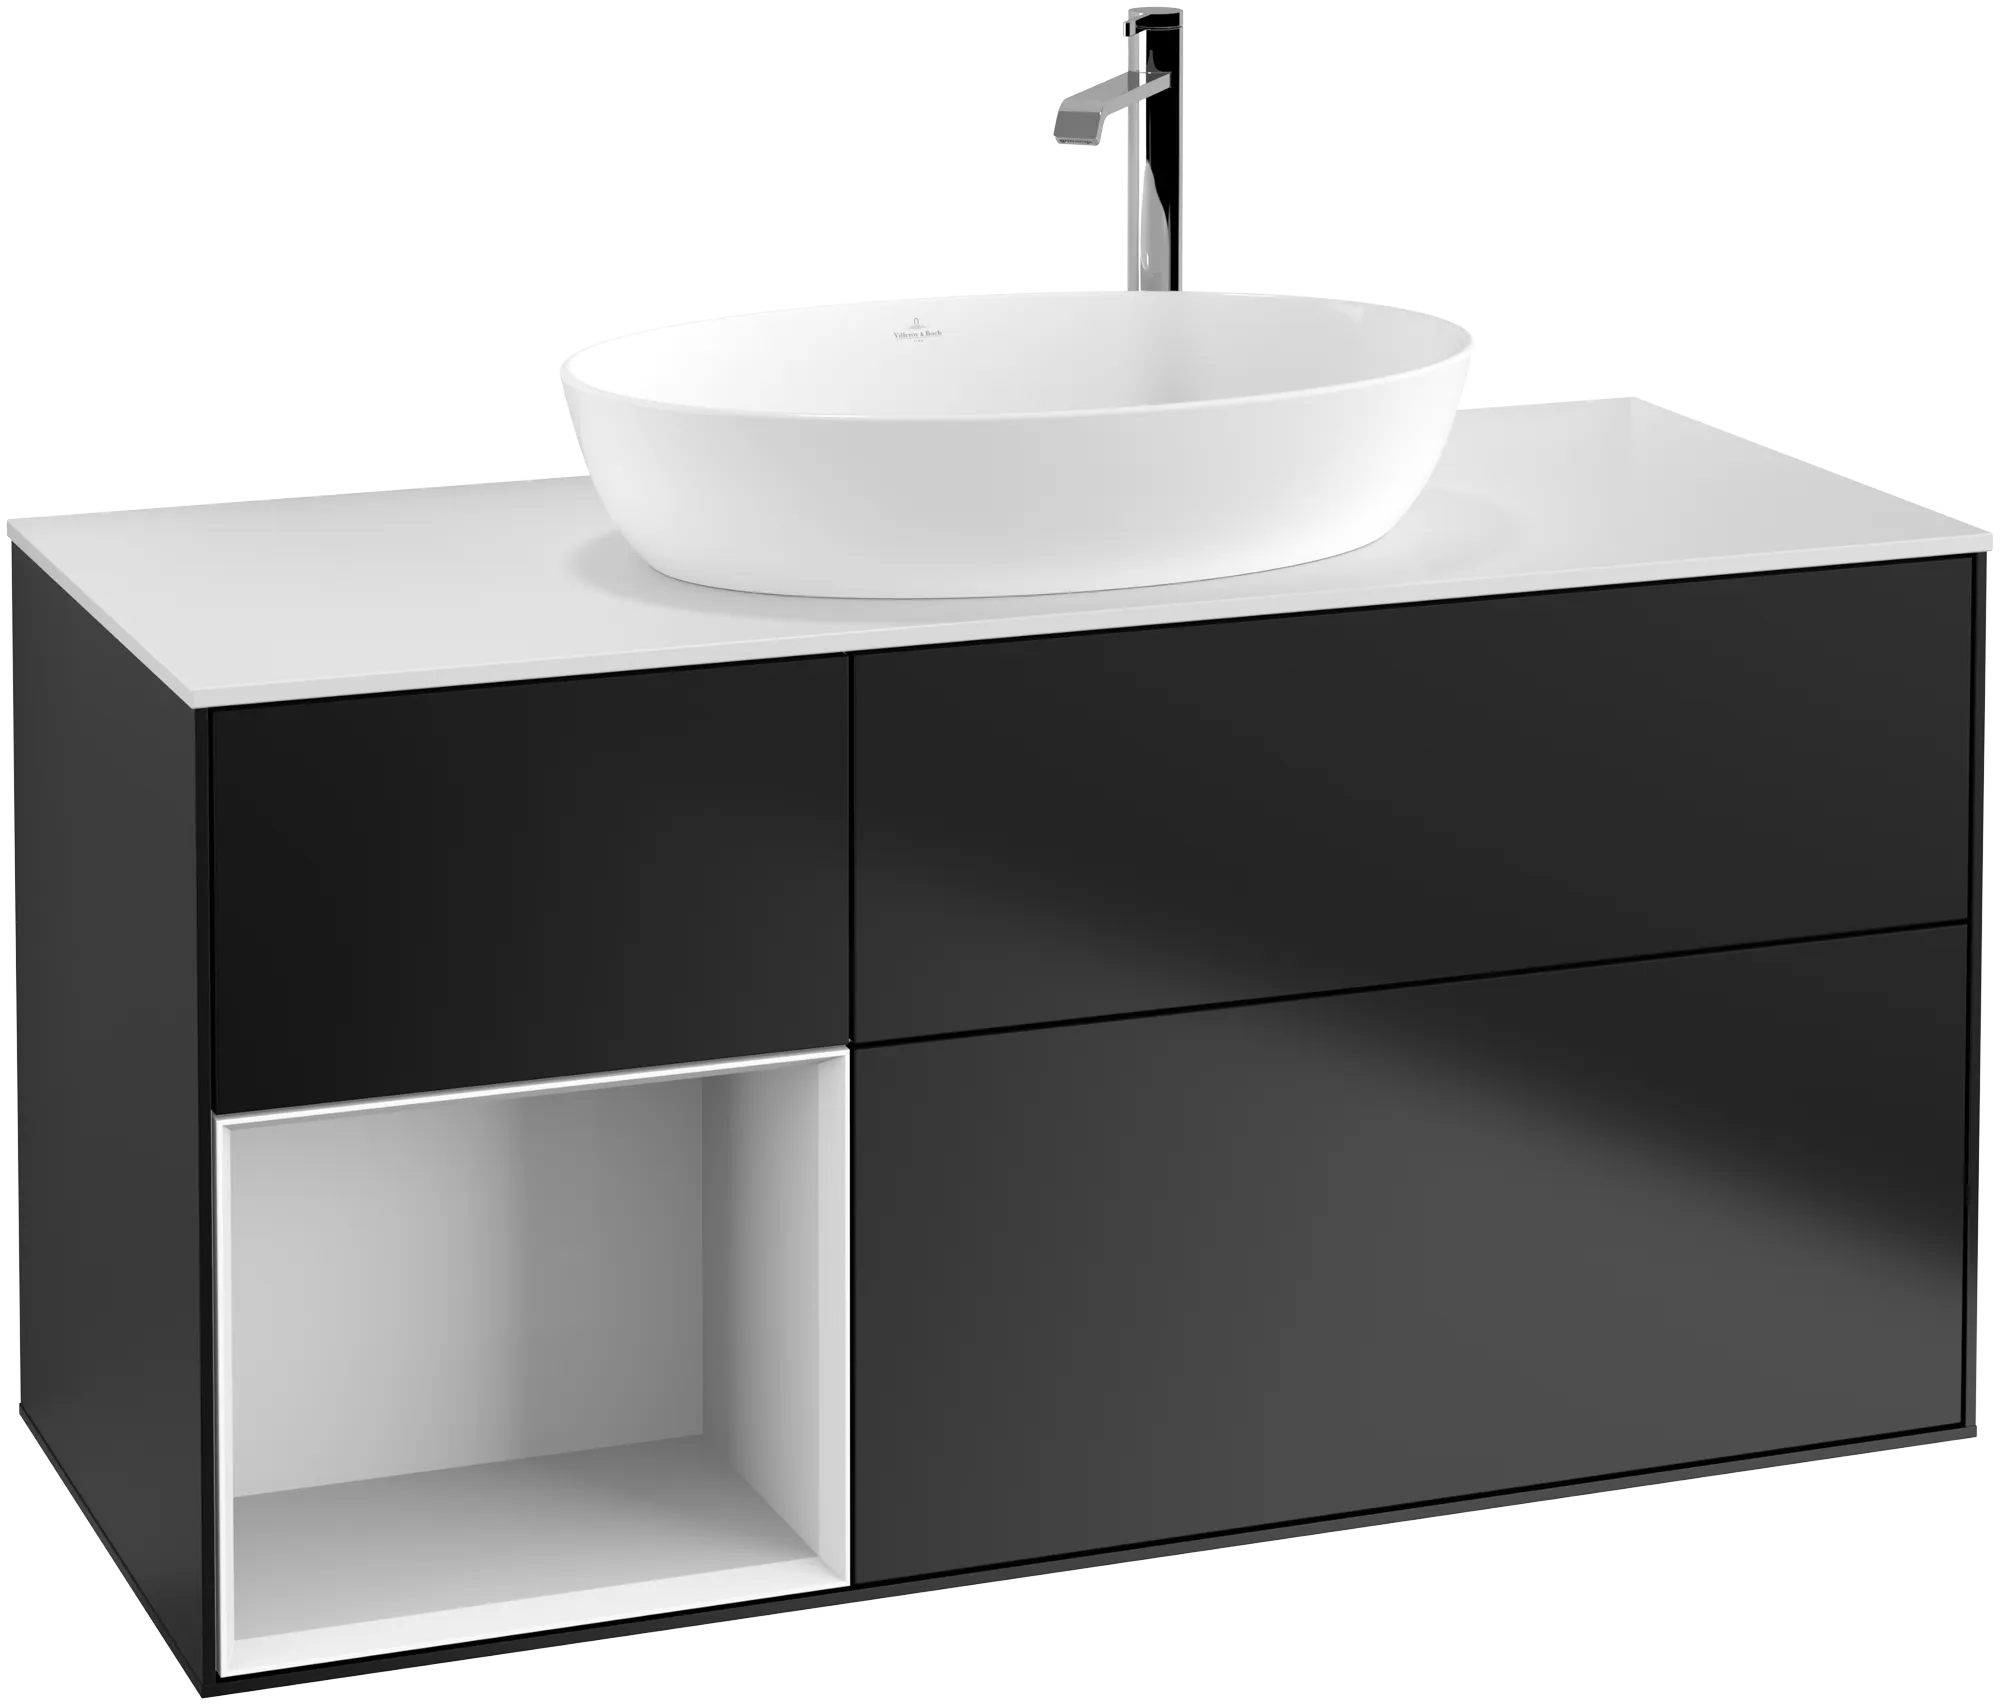 VILLEROY BOCH Finion Vanity unit, with lighting, 3 pull-out compartments, 1200 x 603 x 501 mm, Black Matt Lacquer / Glossy White Lacquer / Glass White Matt #G941GFPD resmi